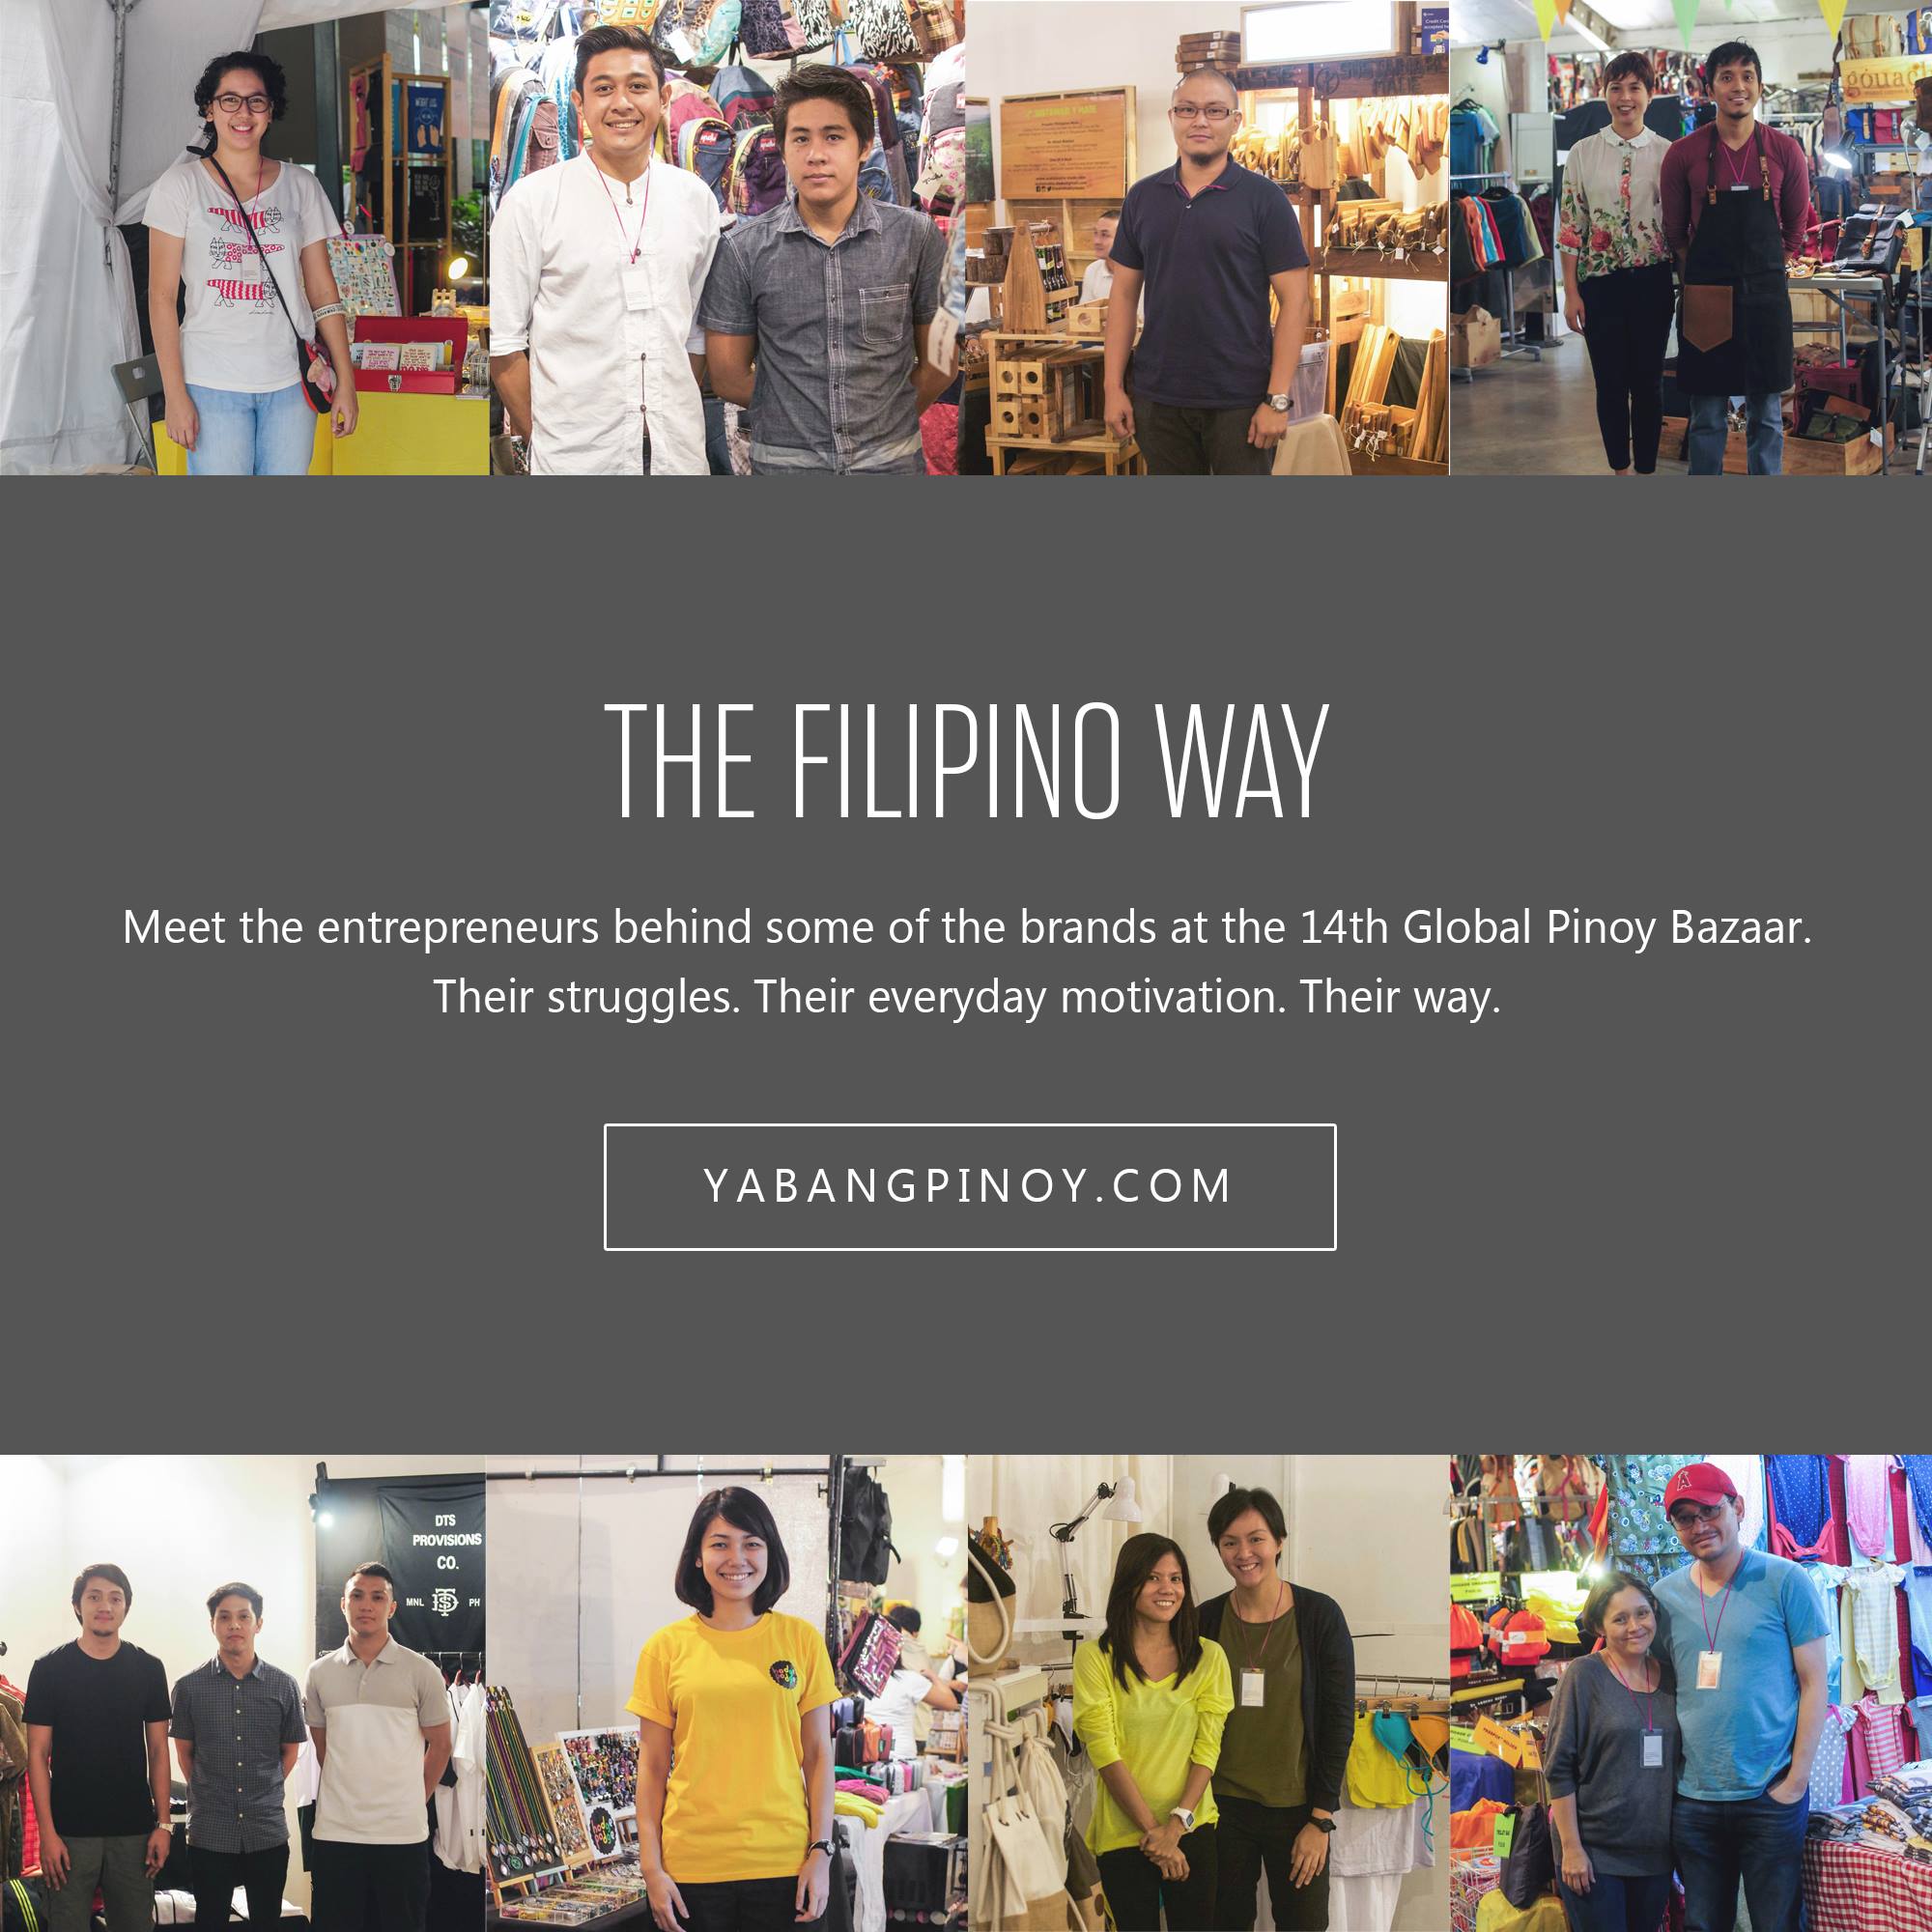 Yabang Pinoy Know the way of the artists, designers, craftsmen, makers, specialists, pioneers and innovators of the upcoming 14th Global Pinoy Bazaar. bit.ly/14thGPB — with Bhima Garcia Ferreros and Yadu Salvacion.